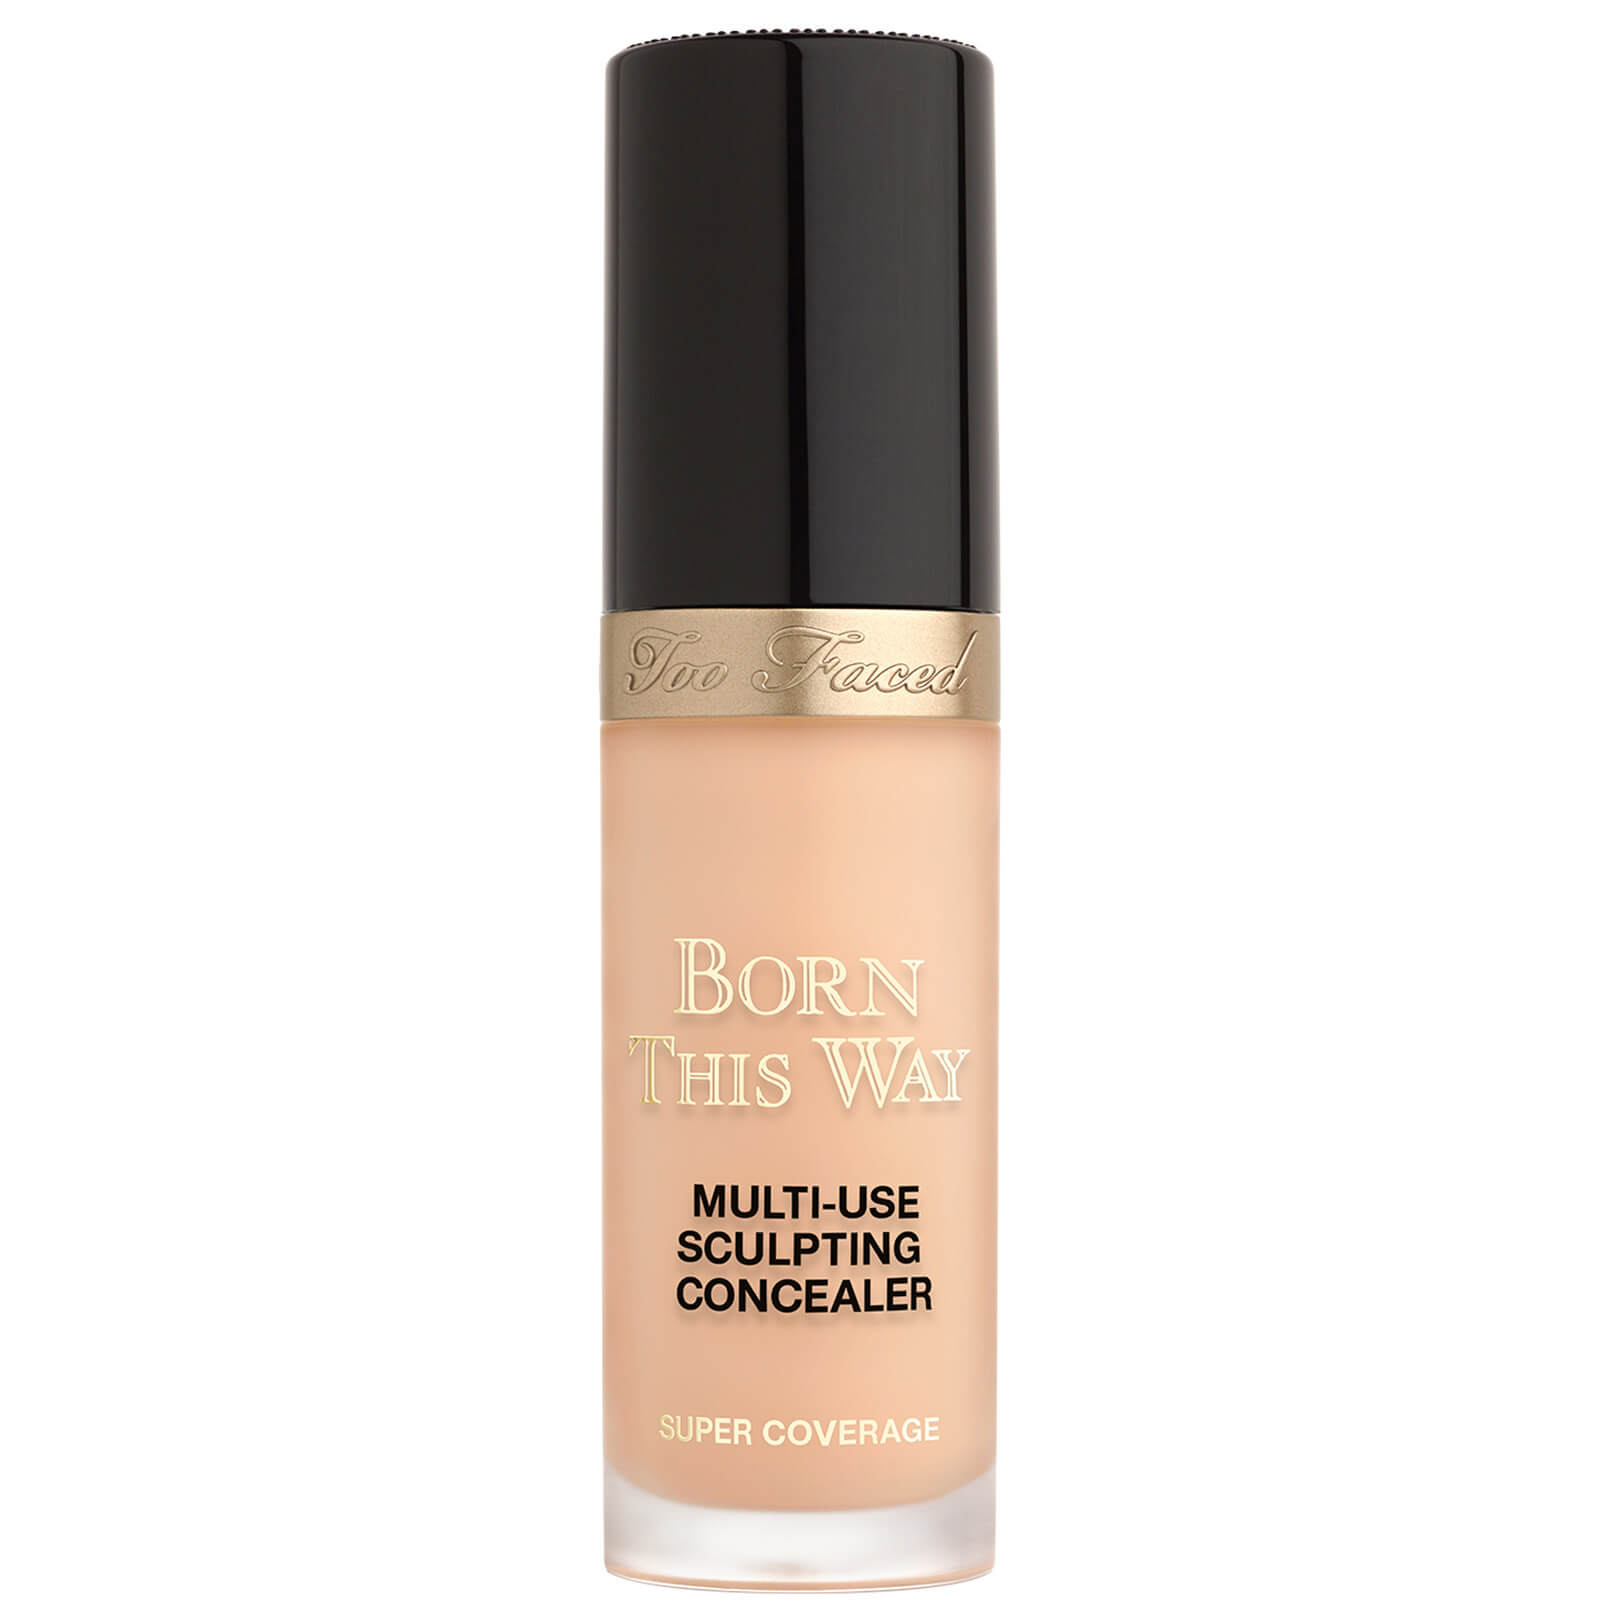 Too Faced Born This Way Super Coverage Multi-Use Concealer 13.5ml (Various Shades) - Cream Puff